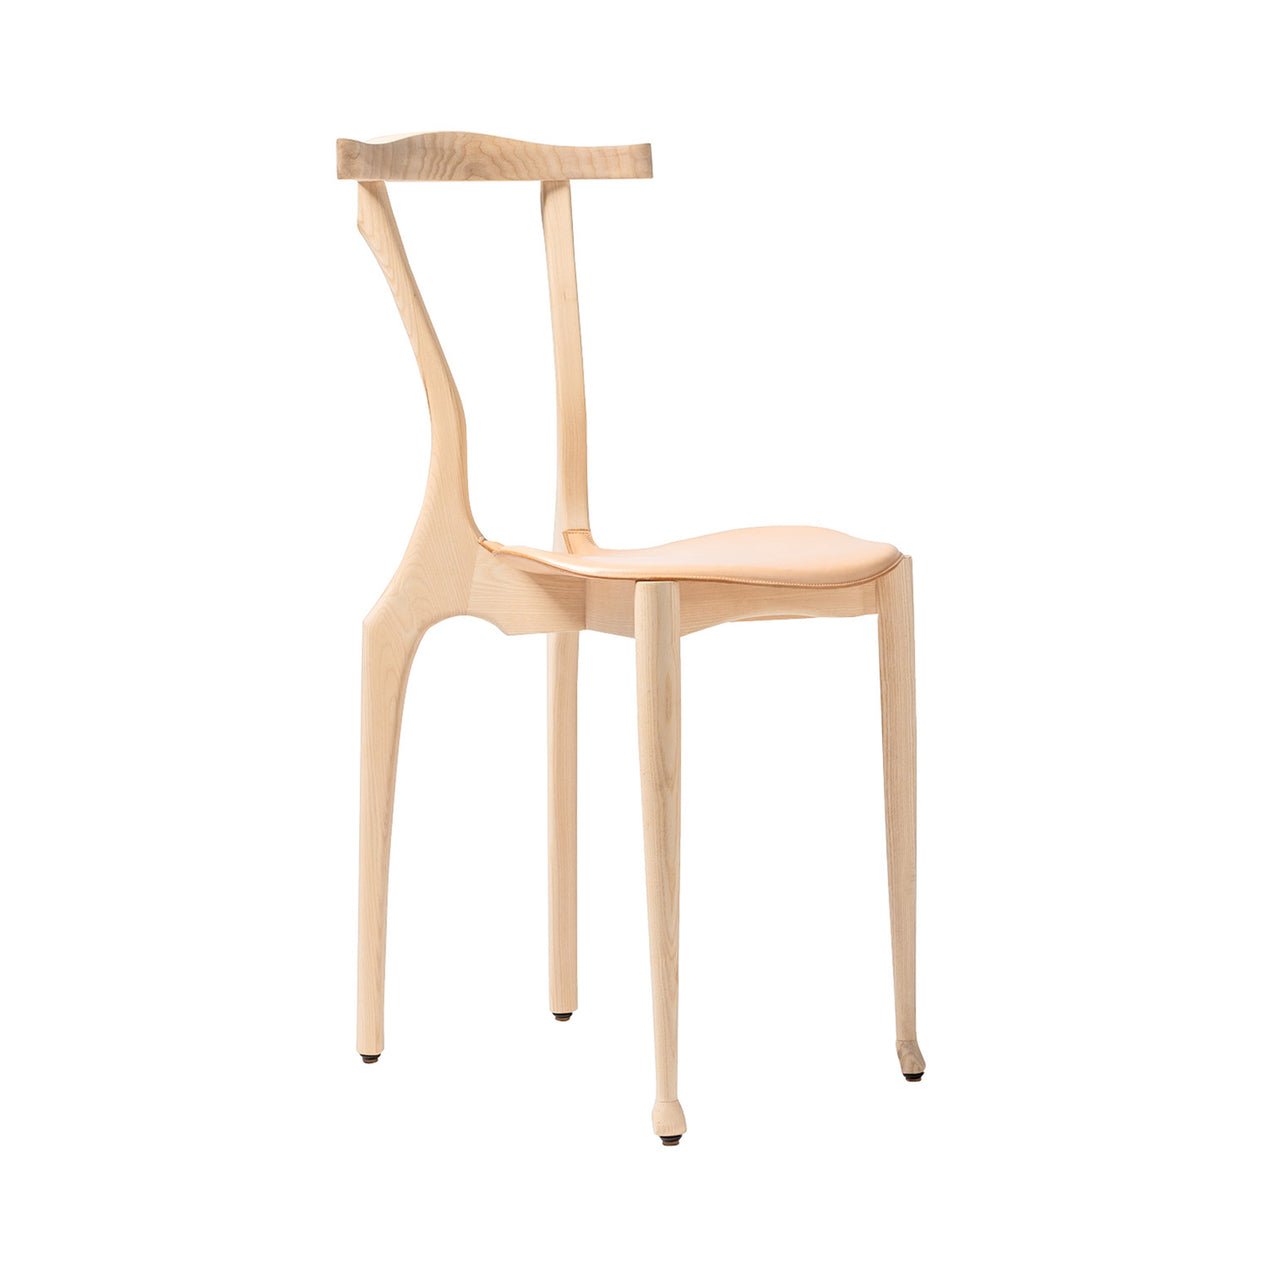 Gaulinetta Chair: Natural Leather